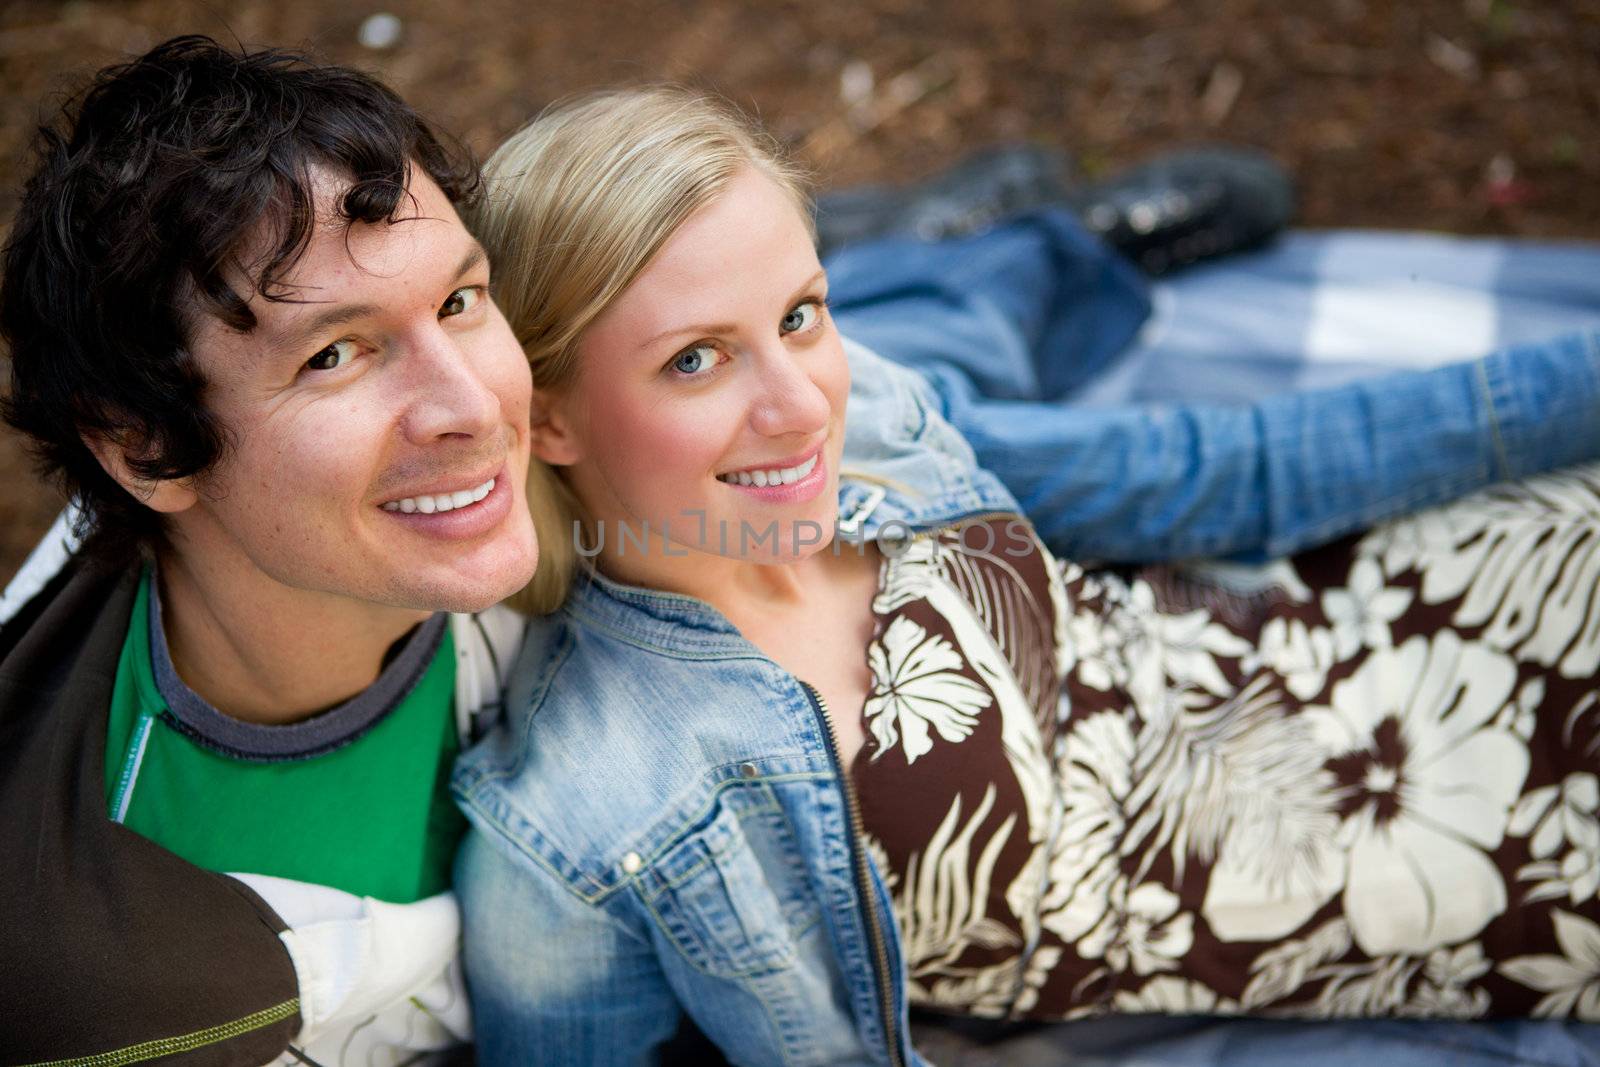 A couple smiling at the camera relaxing outdoors